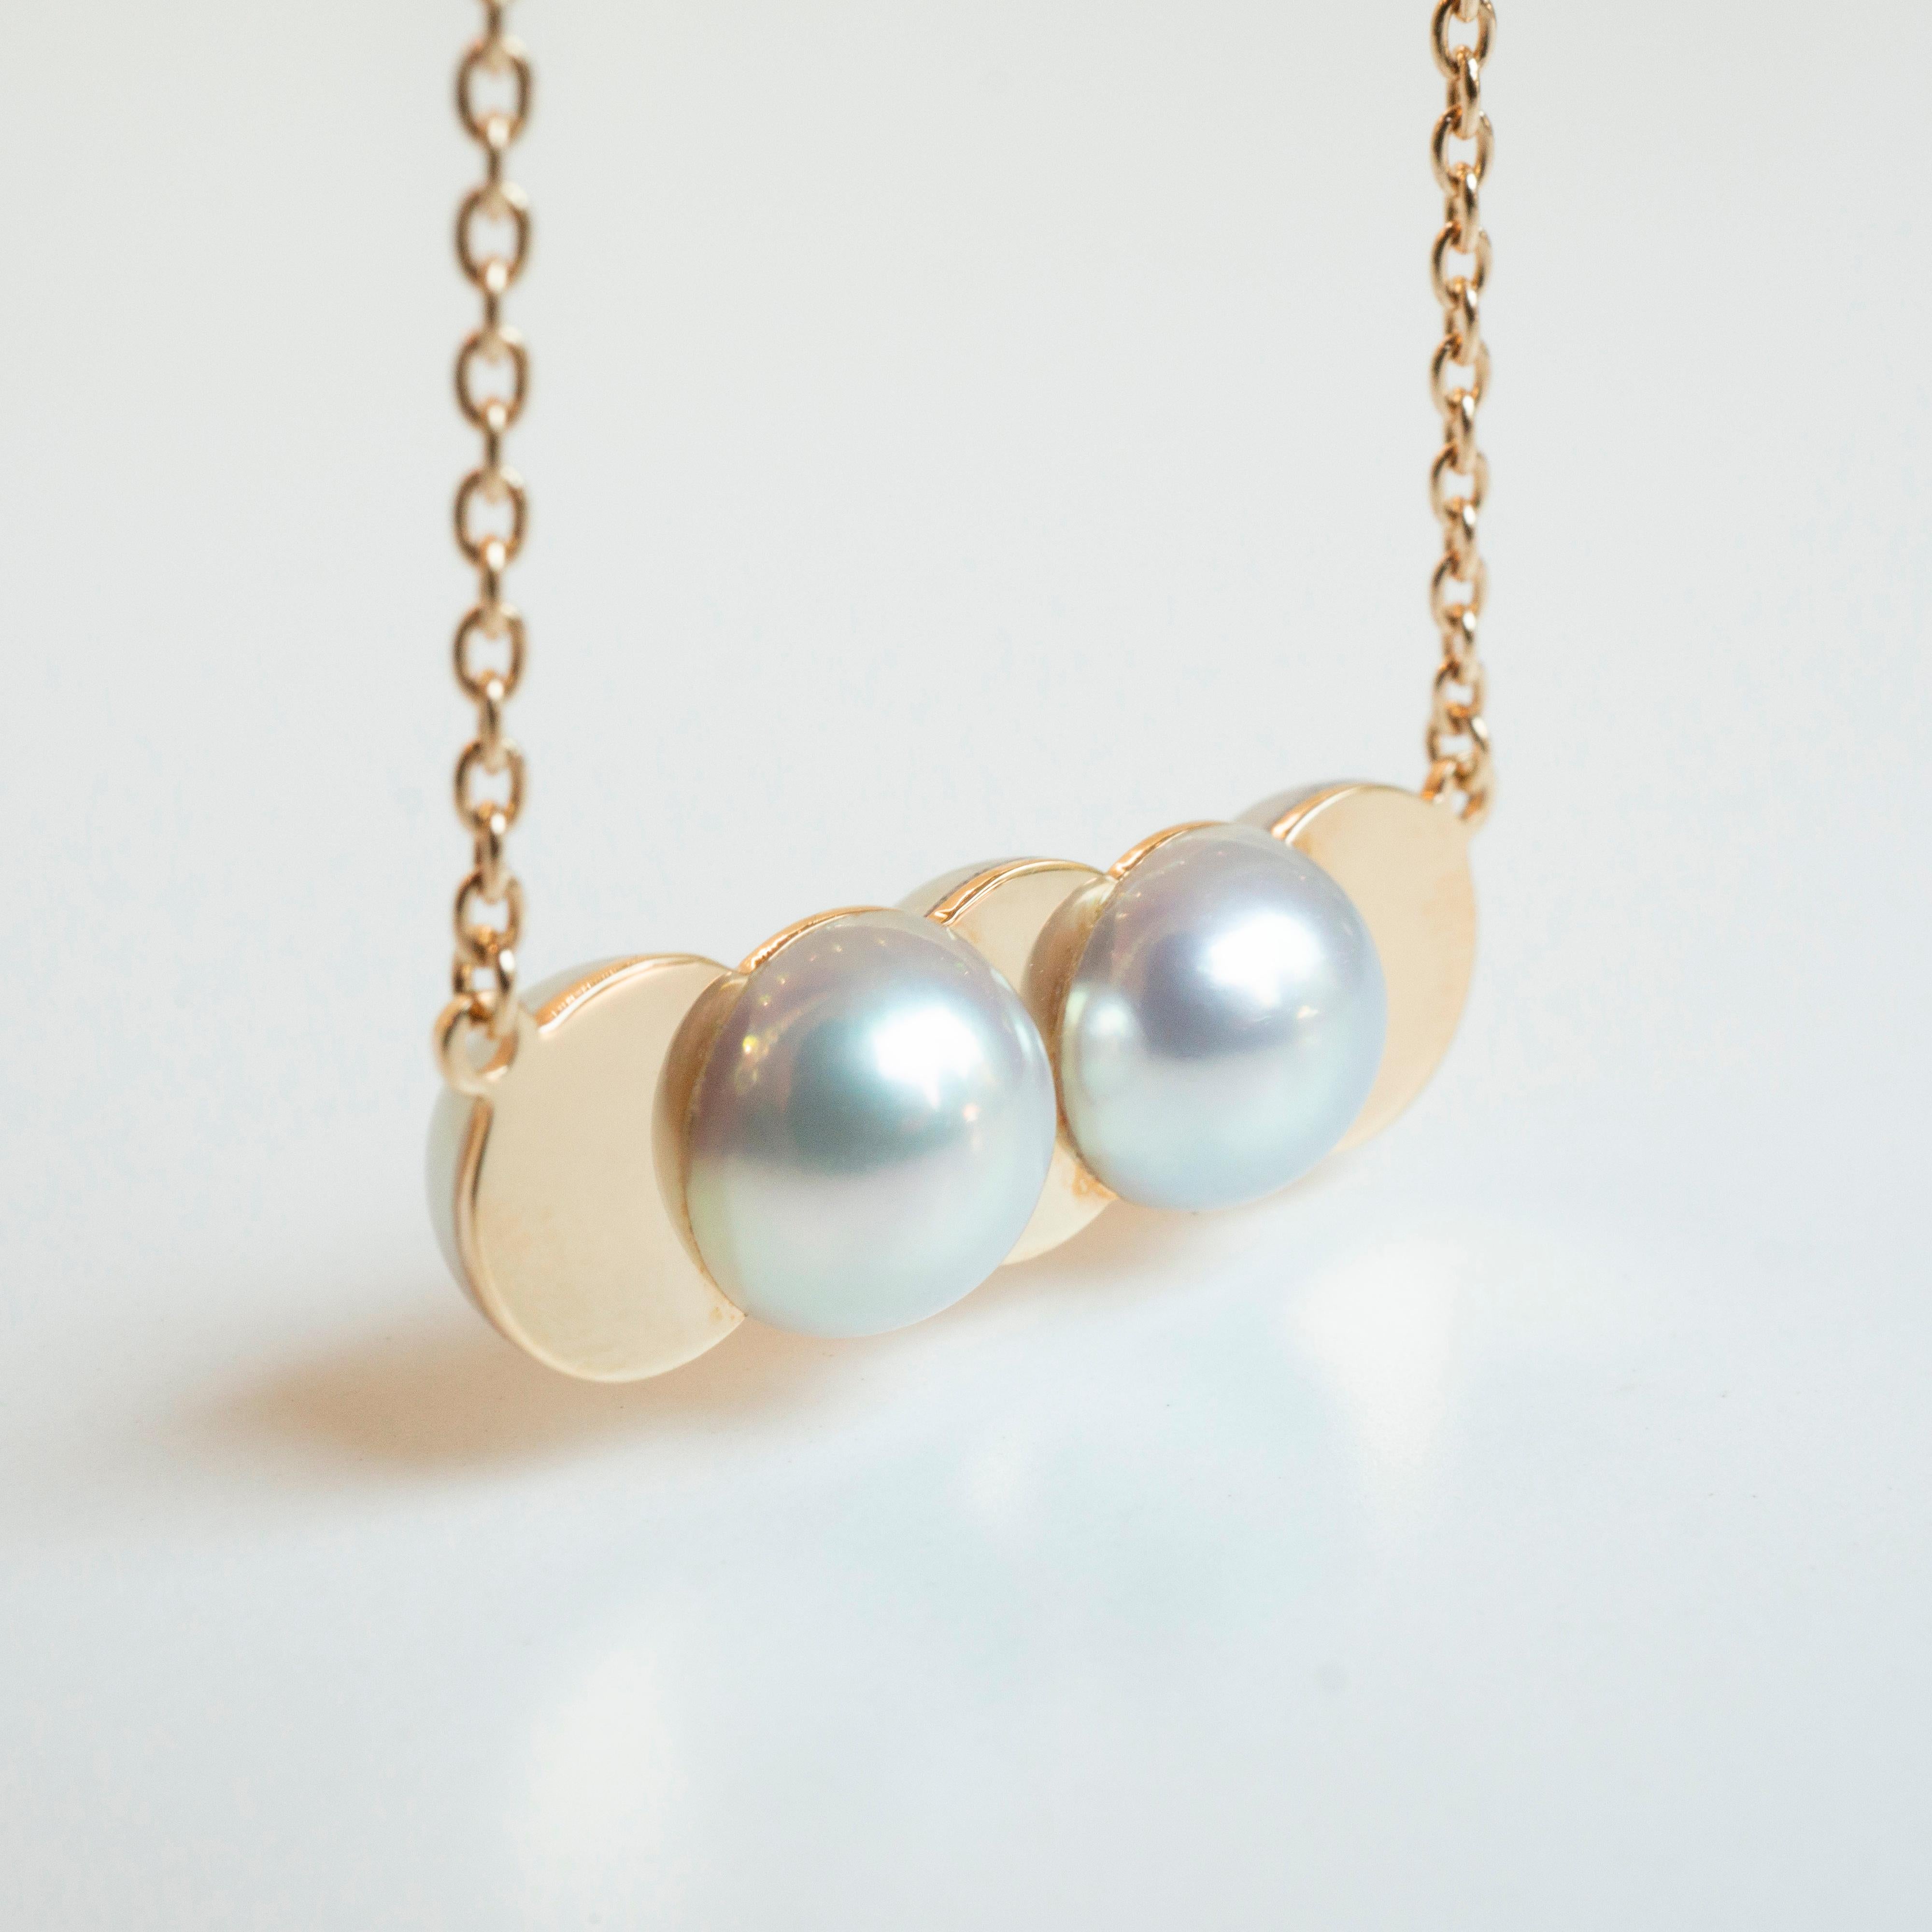 18 Karat Yellow Gold Akoya Pearl Drop Necklace In New Condition For Sale In Shibuya, Tokyo, JP